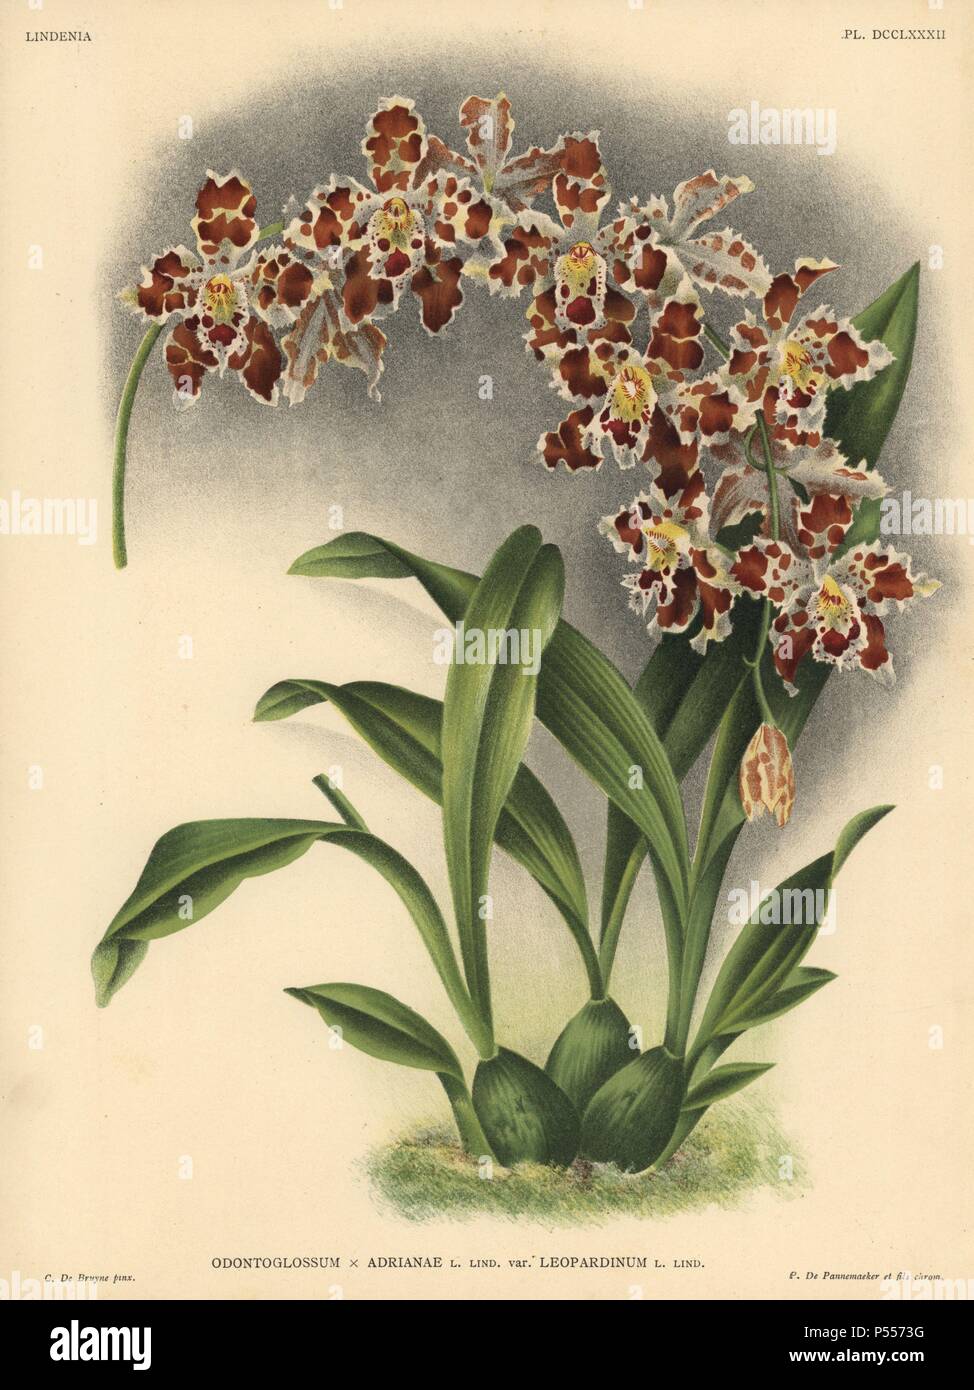 Leopardinum variety of Odontoglossum x Adrianae hybrid orchid. Illustration drawn by C. de Bruyne and chromolithographed by P. de Pannemaeker et fils from Lucien Linden's "Lindenia, Iconographie des Orchidees," Brussels, 1902. Stock Photo